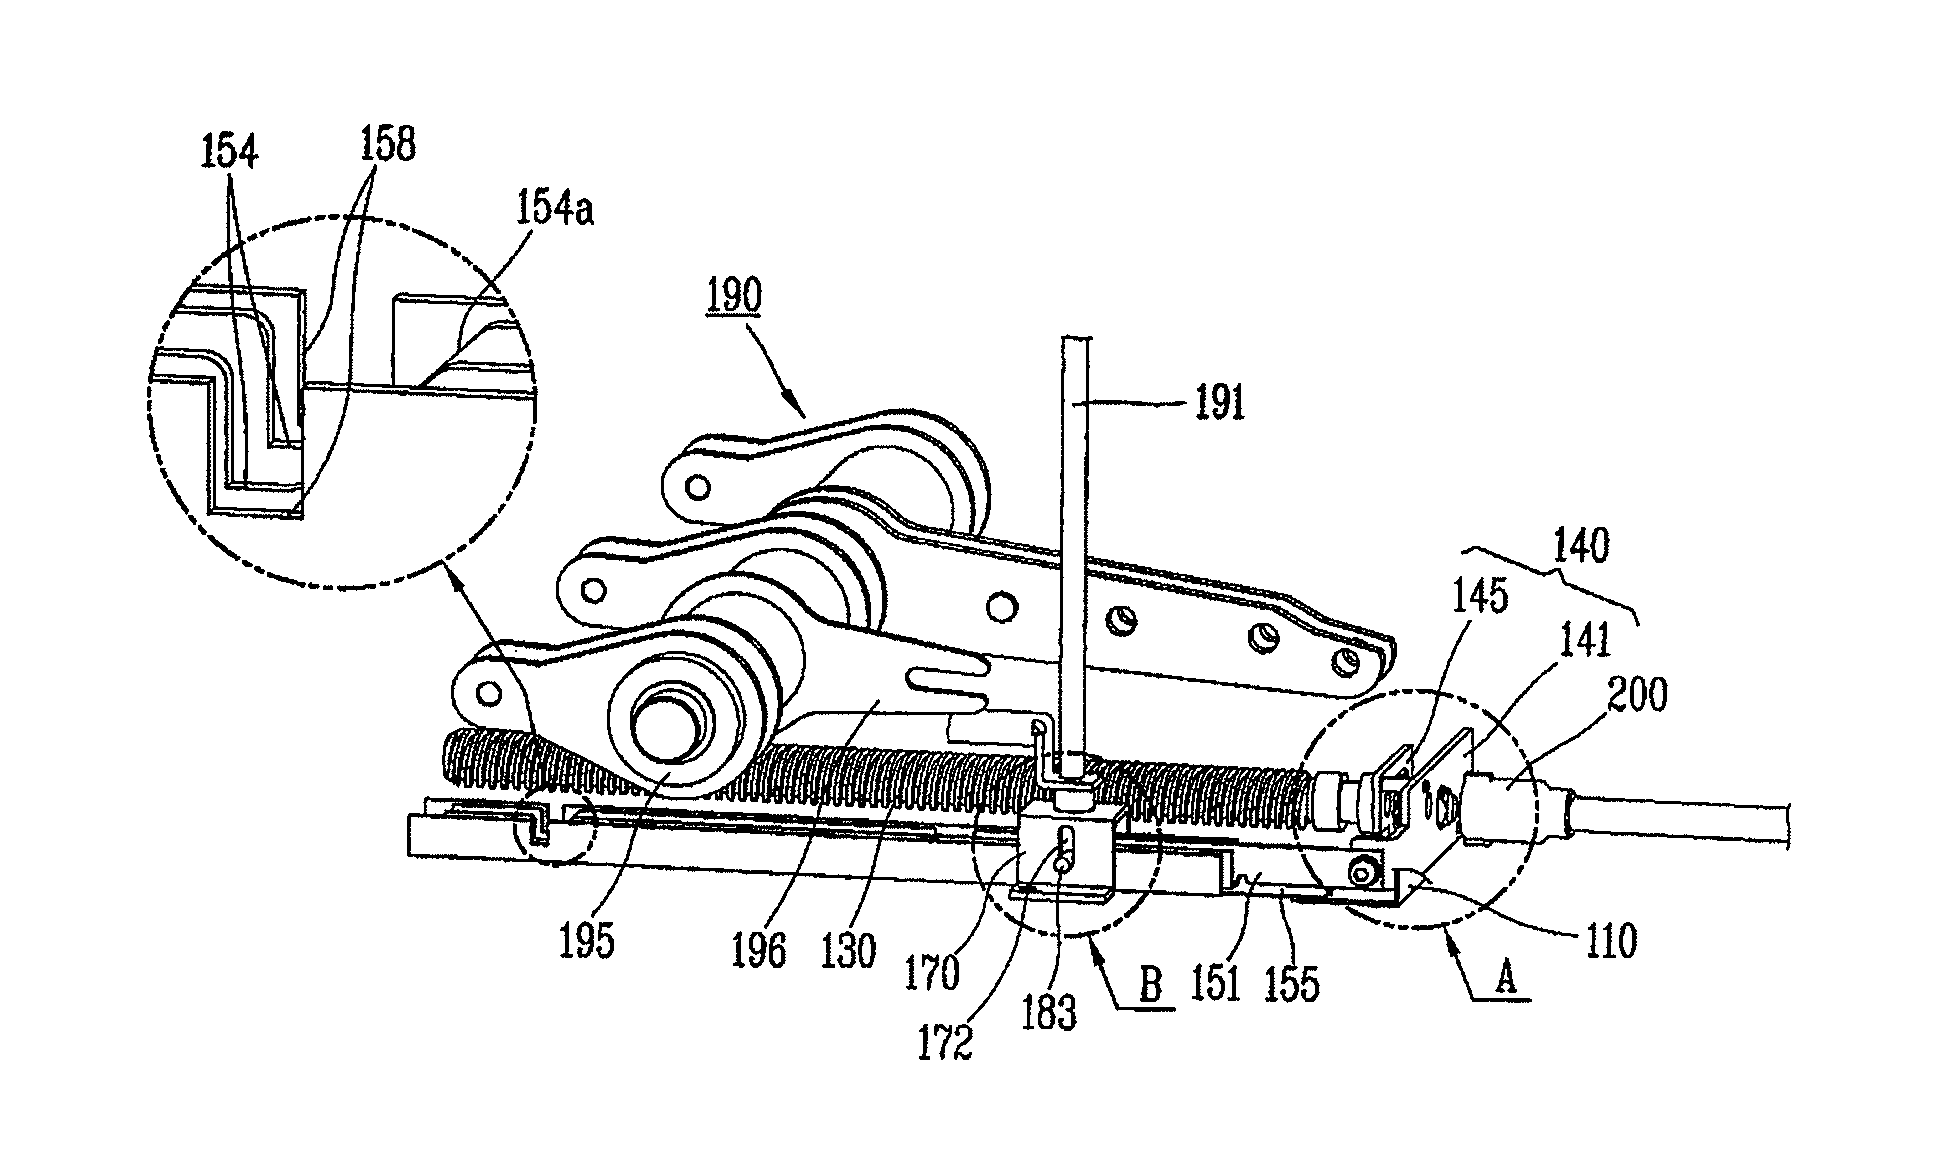 Apparatus for preventing withdrawing or inserting of carriage in circuit breaker